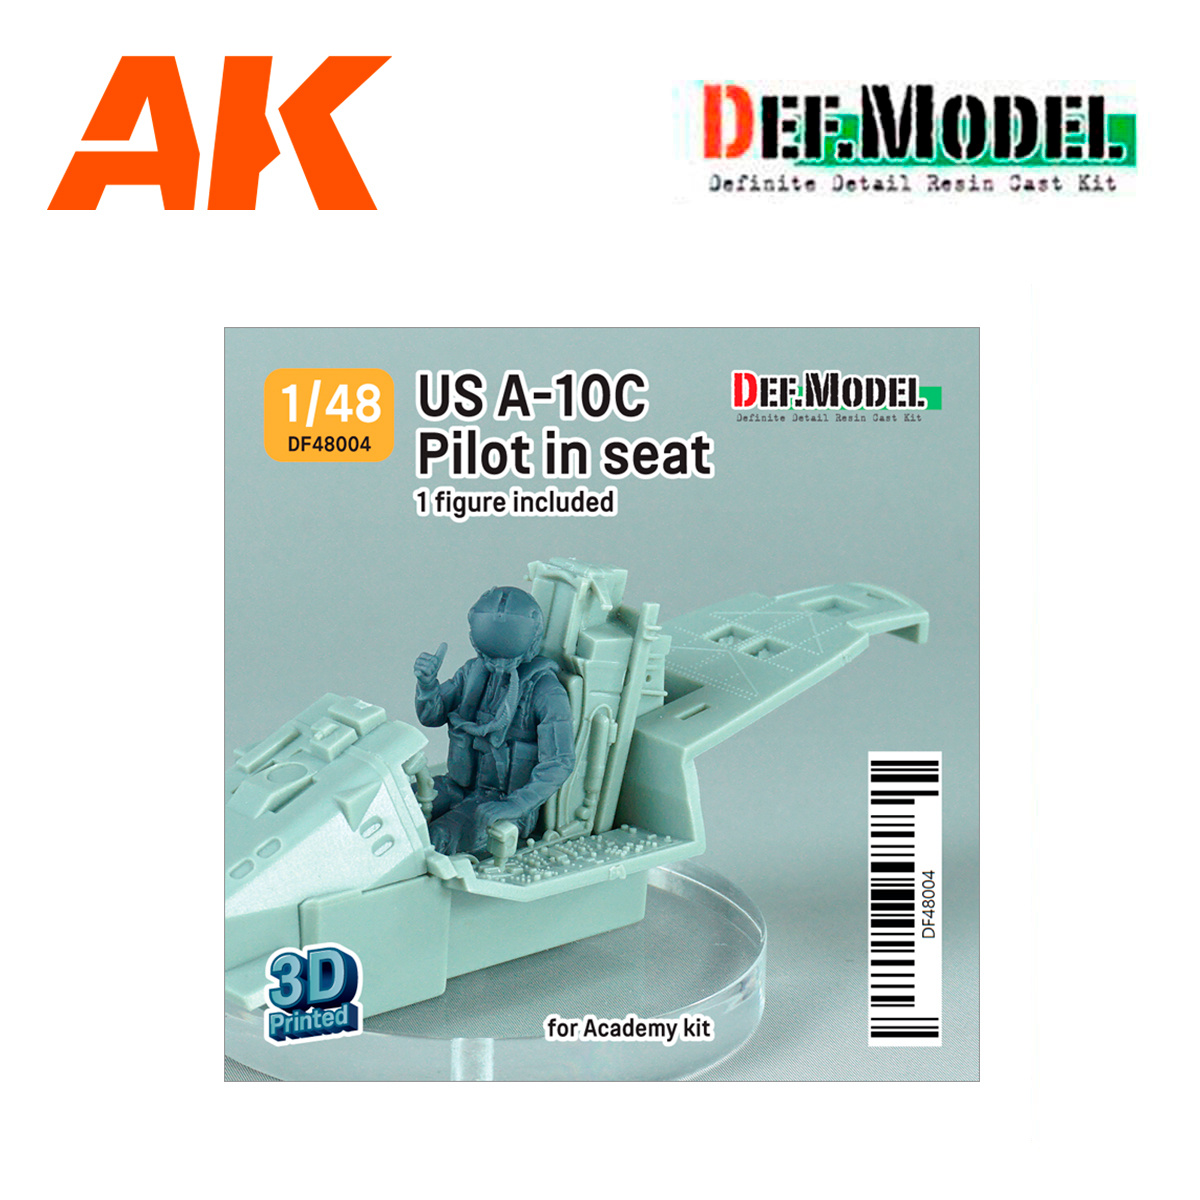 1/48 US A-10C Pilot in seat (for Academy A-10C kit)(3d Printed kit)